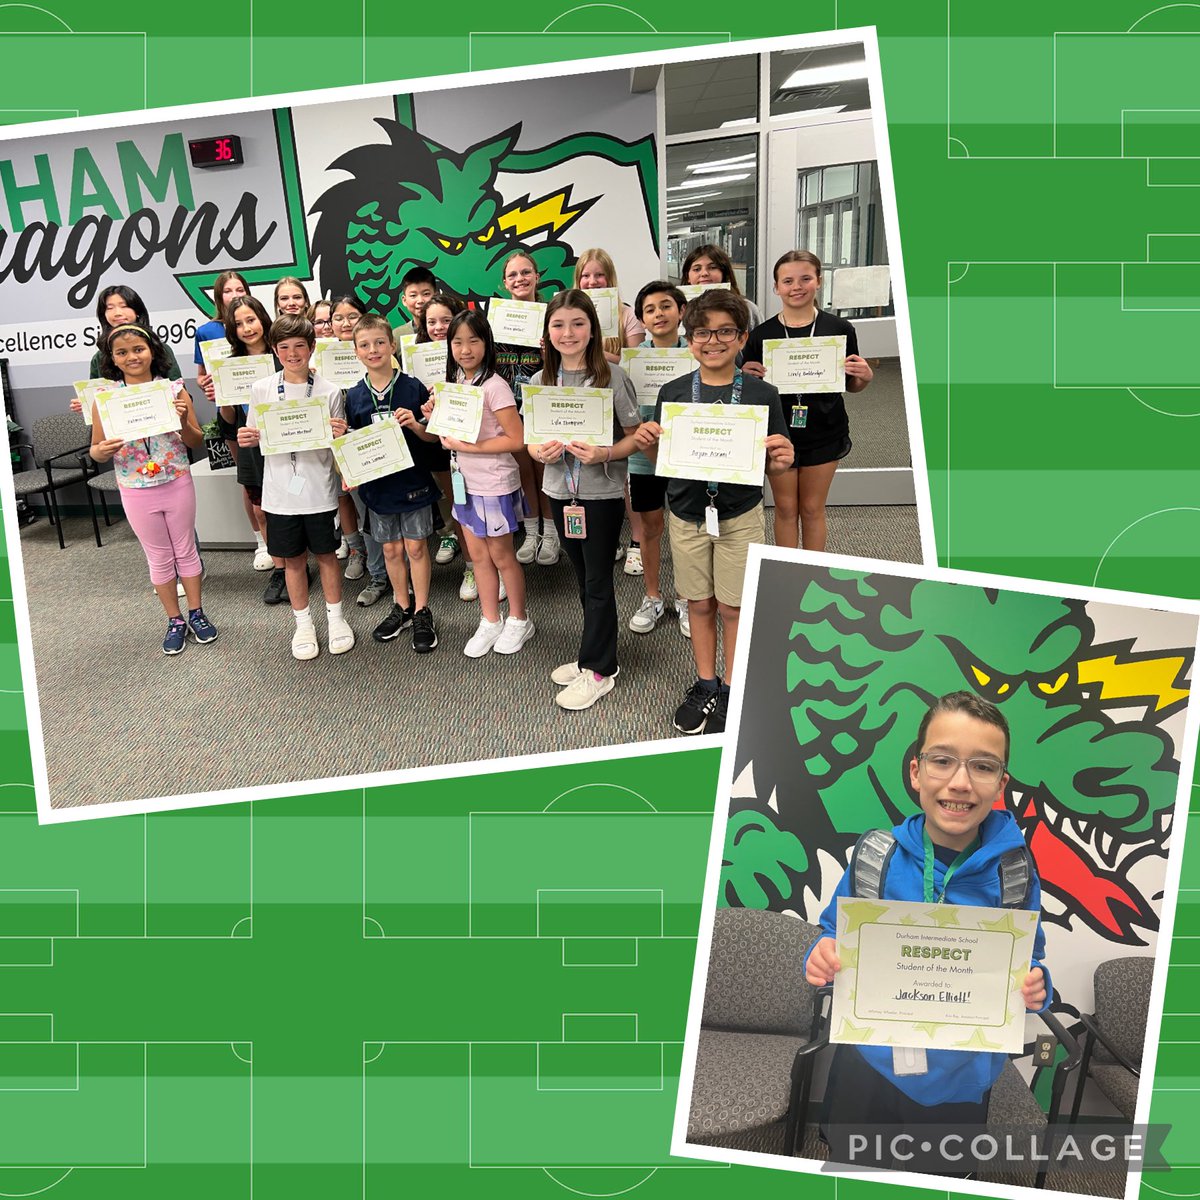 Congratulations to our @durham_dragon students of the month for February! These students represent RESPECT and were recognized for showing care and consideration for others. #DragonProud #InspireExcellence #youbelonghere